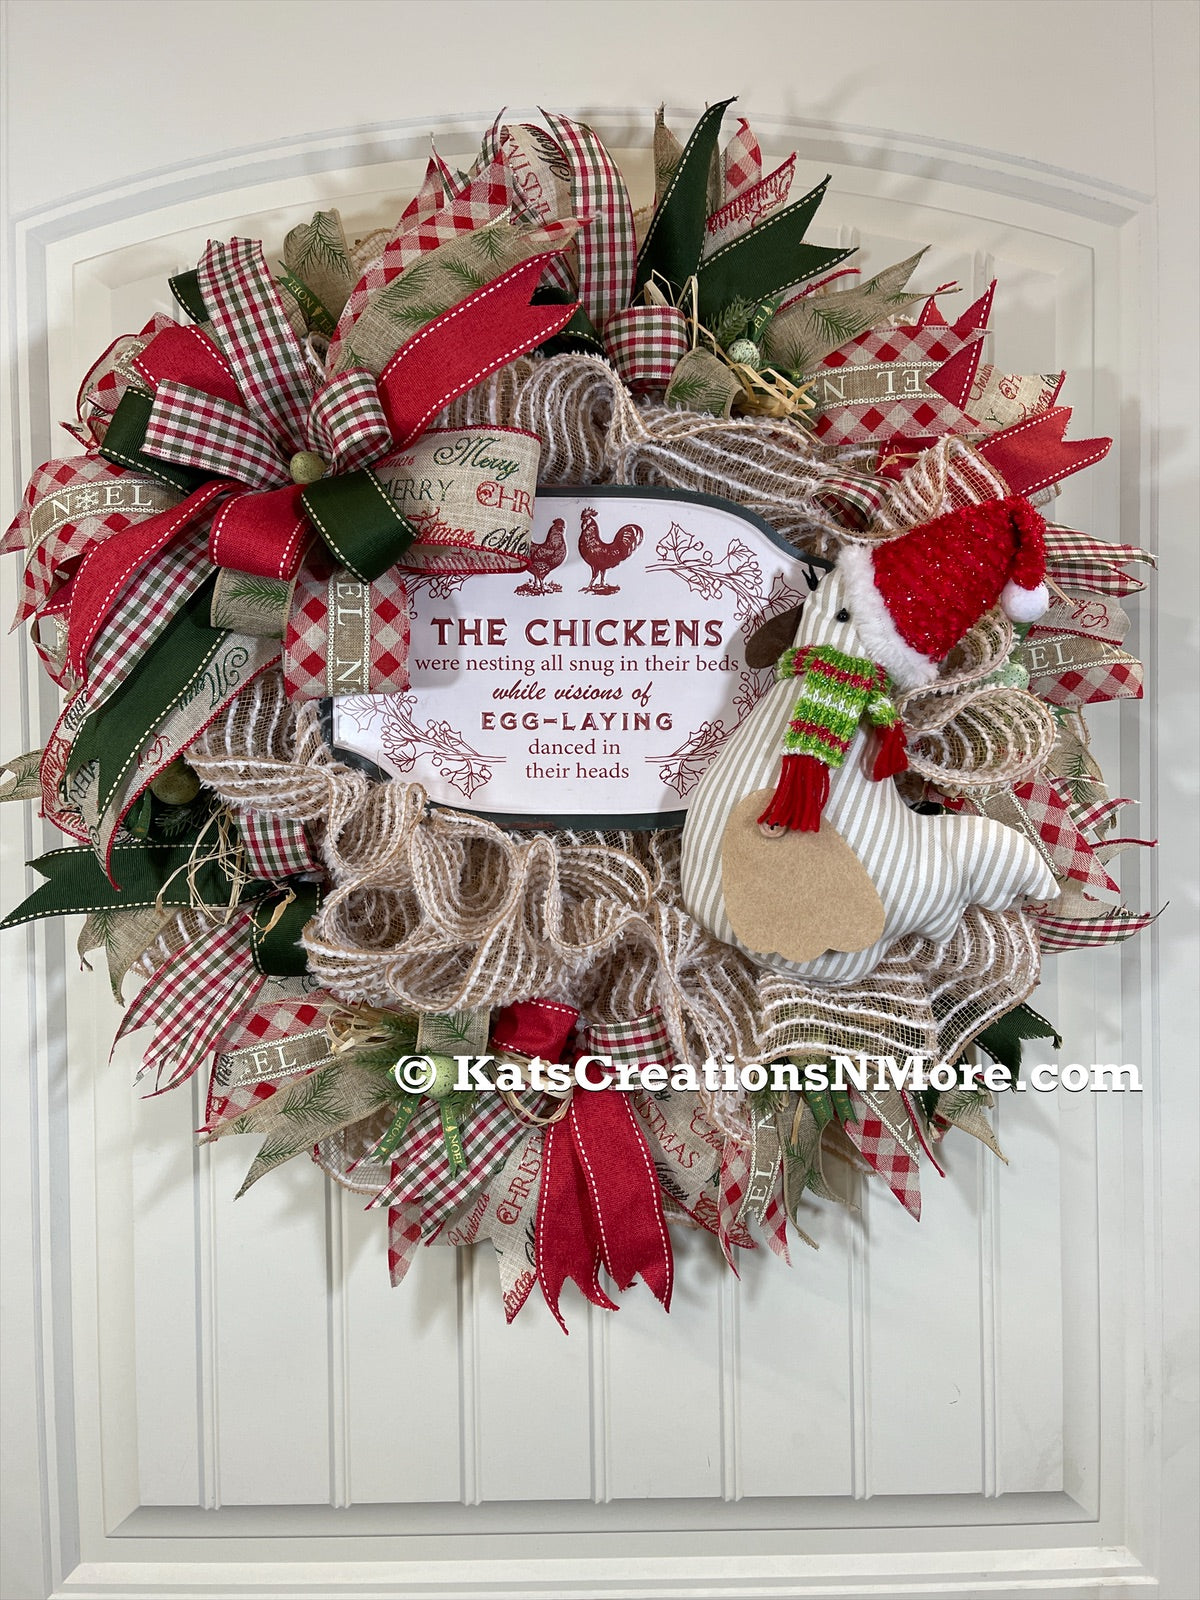 Red, White and Green Deco Mesh Christmas Chicken Wreath with Stuffed Chicken Wearing a Santa hat with Sign, The Chickens were nesting all snug in their beds while visions of egg laying danced in their heads. 